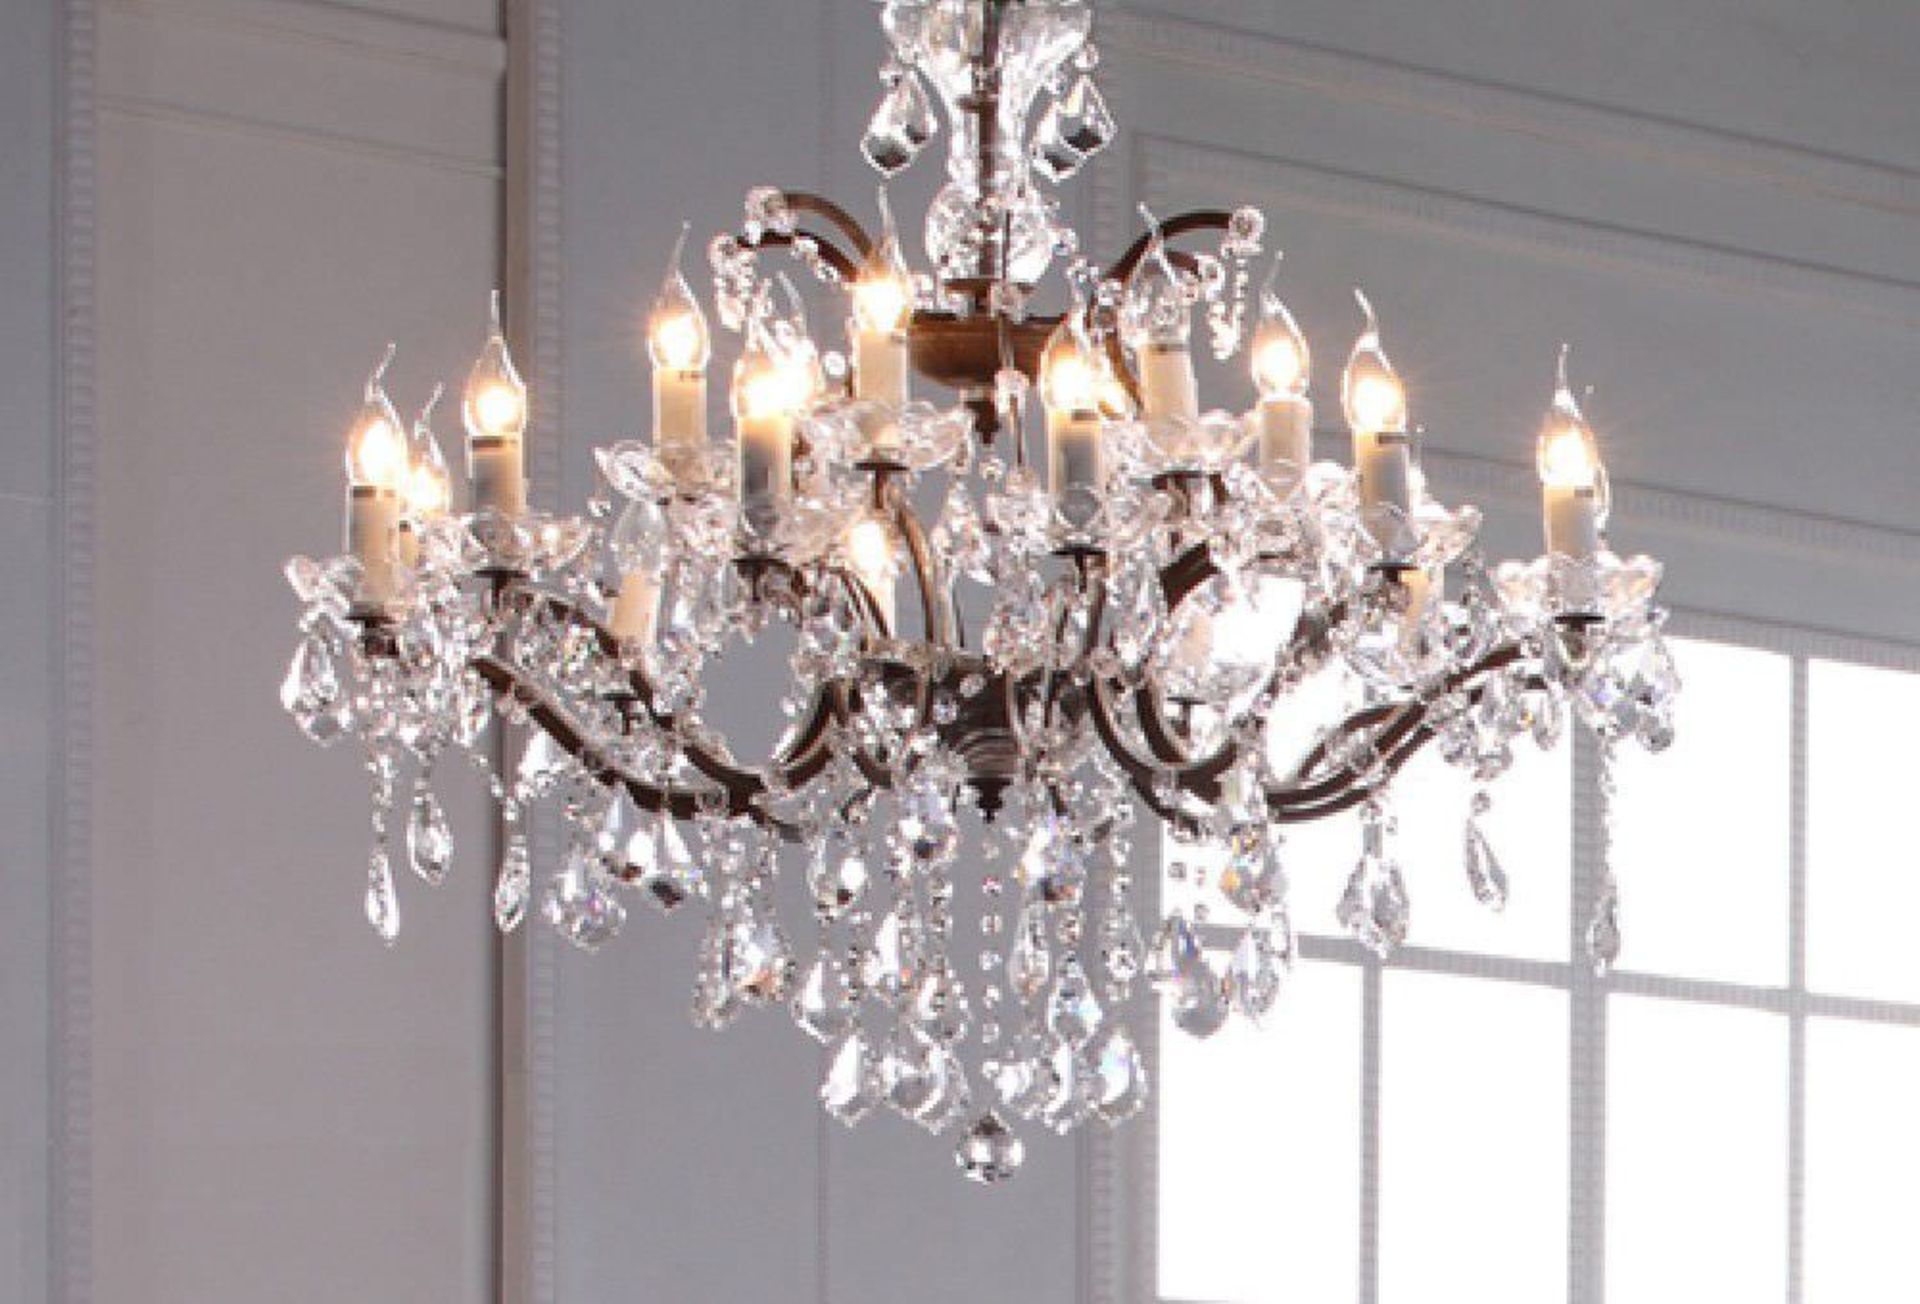 Crystal Chandelier Antique Rust (UK) The Iconic Crystal Chandelier Is A True Testiment To The Design